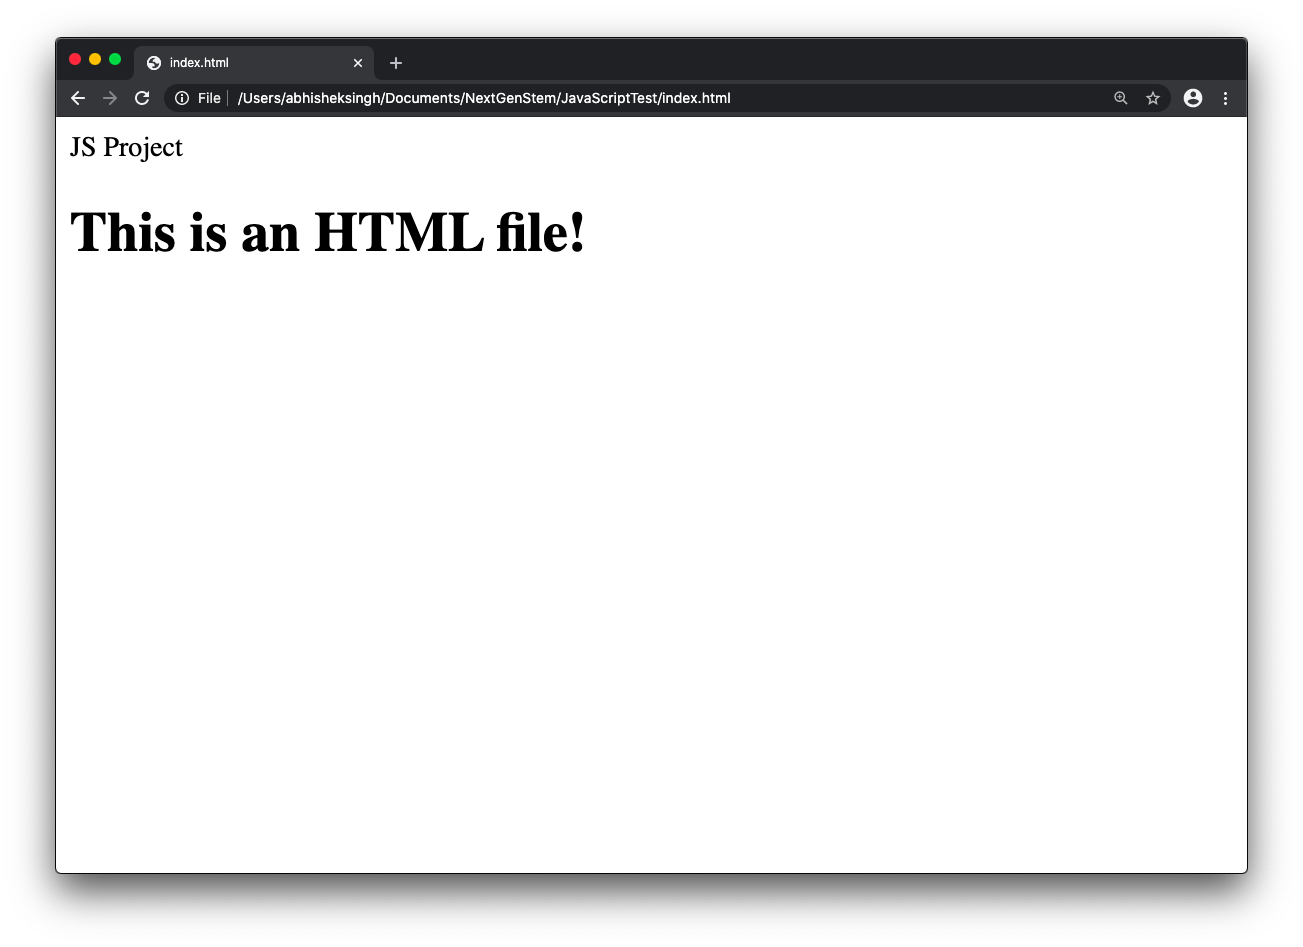 image of html file open in web page with some text on it